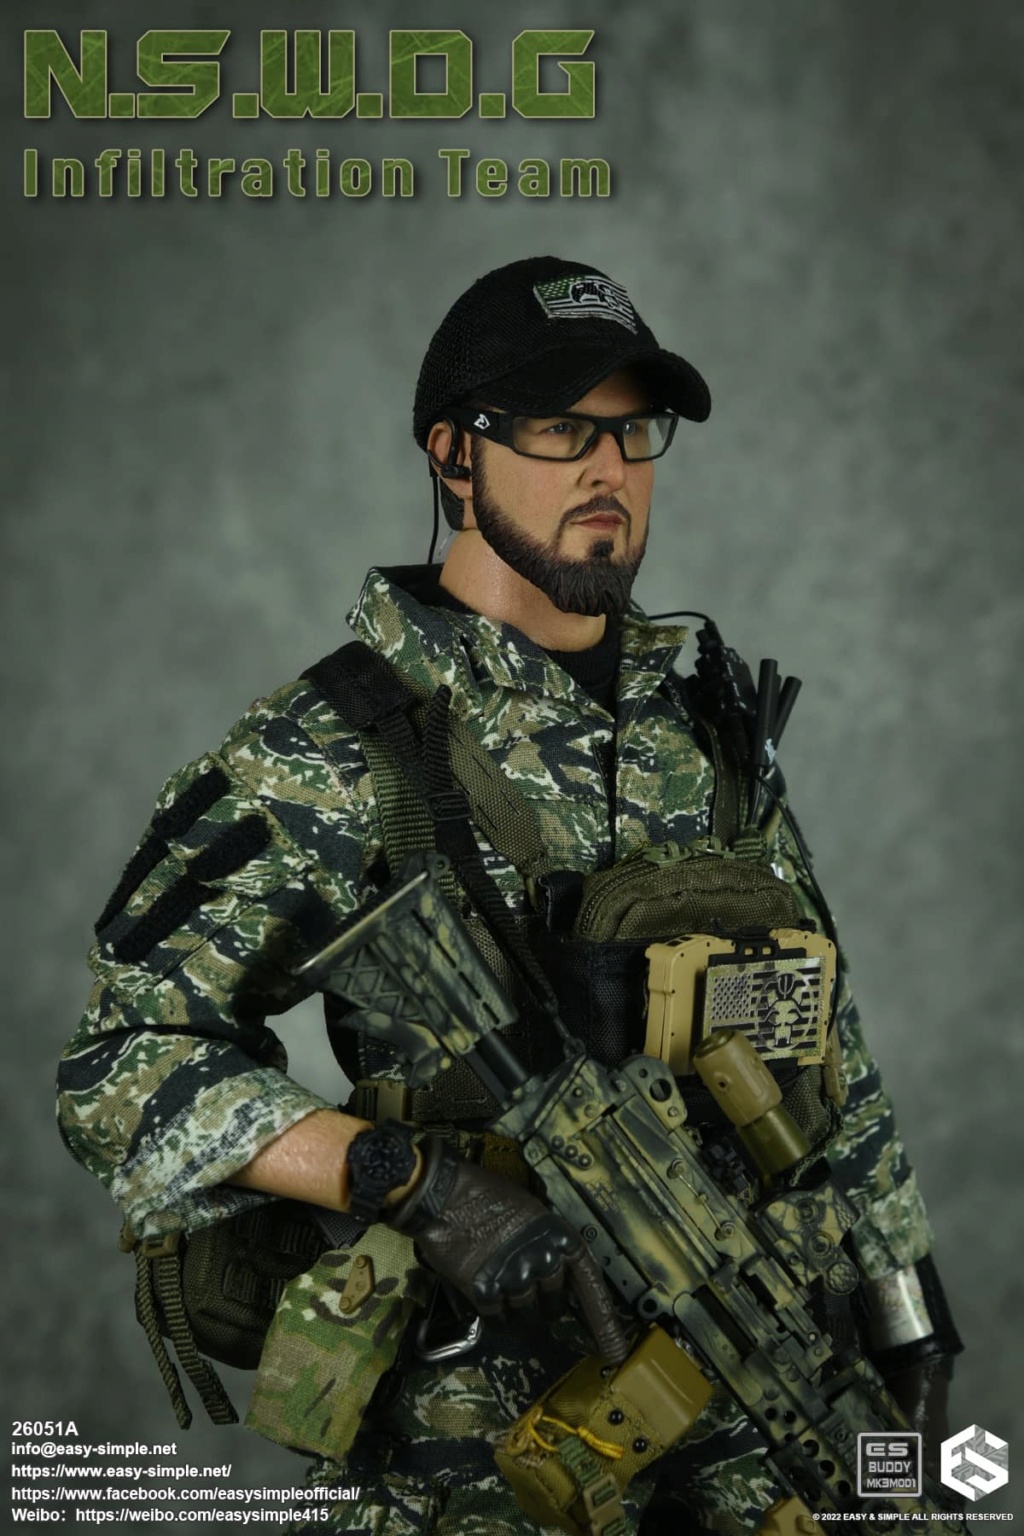 ModernMilitary - NEW PRODUCT: EASY AND SIMPLE 1/6 SCALE FIGURE: N.S.W.D.G INFILTRATION TEAM - (2 Versions) 19268